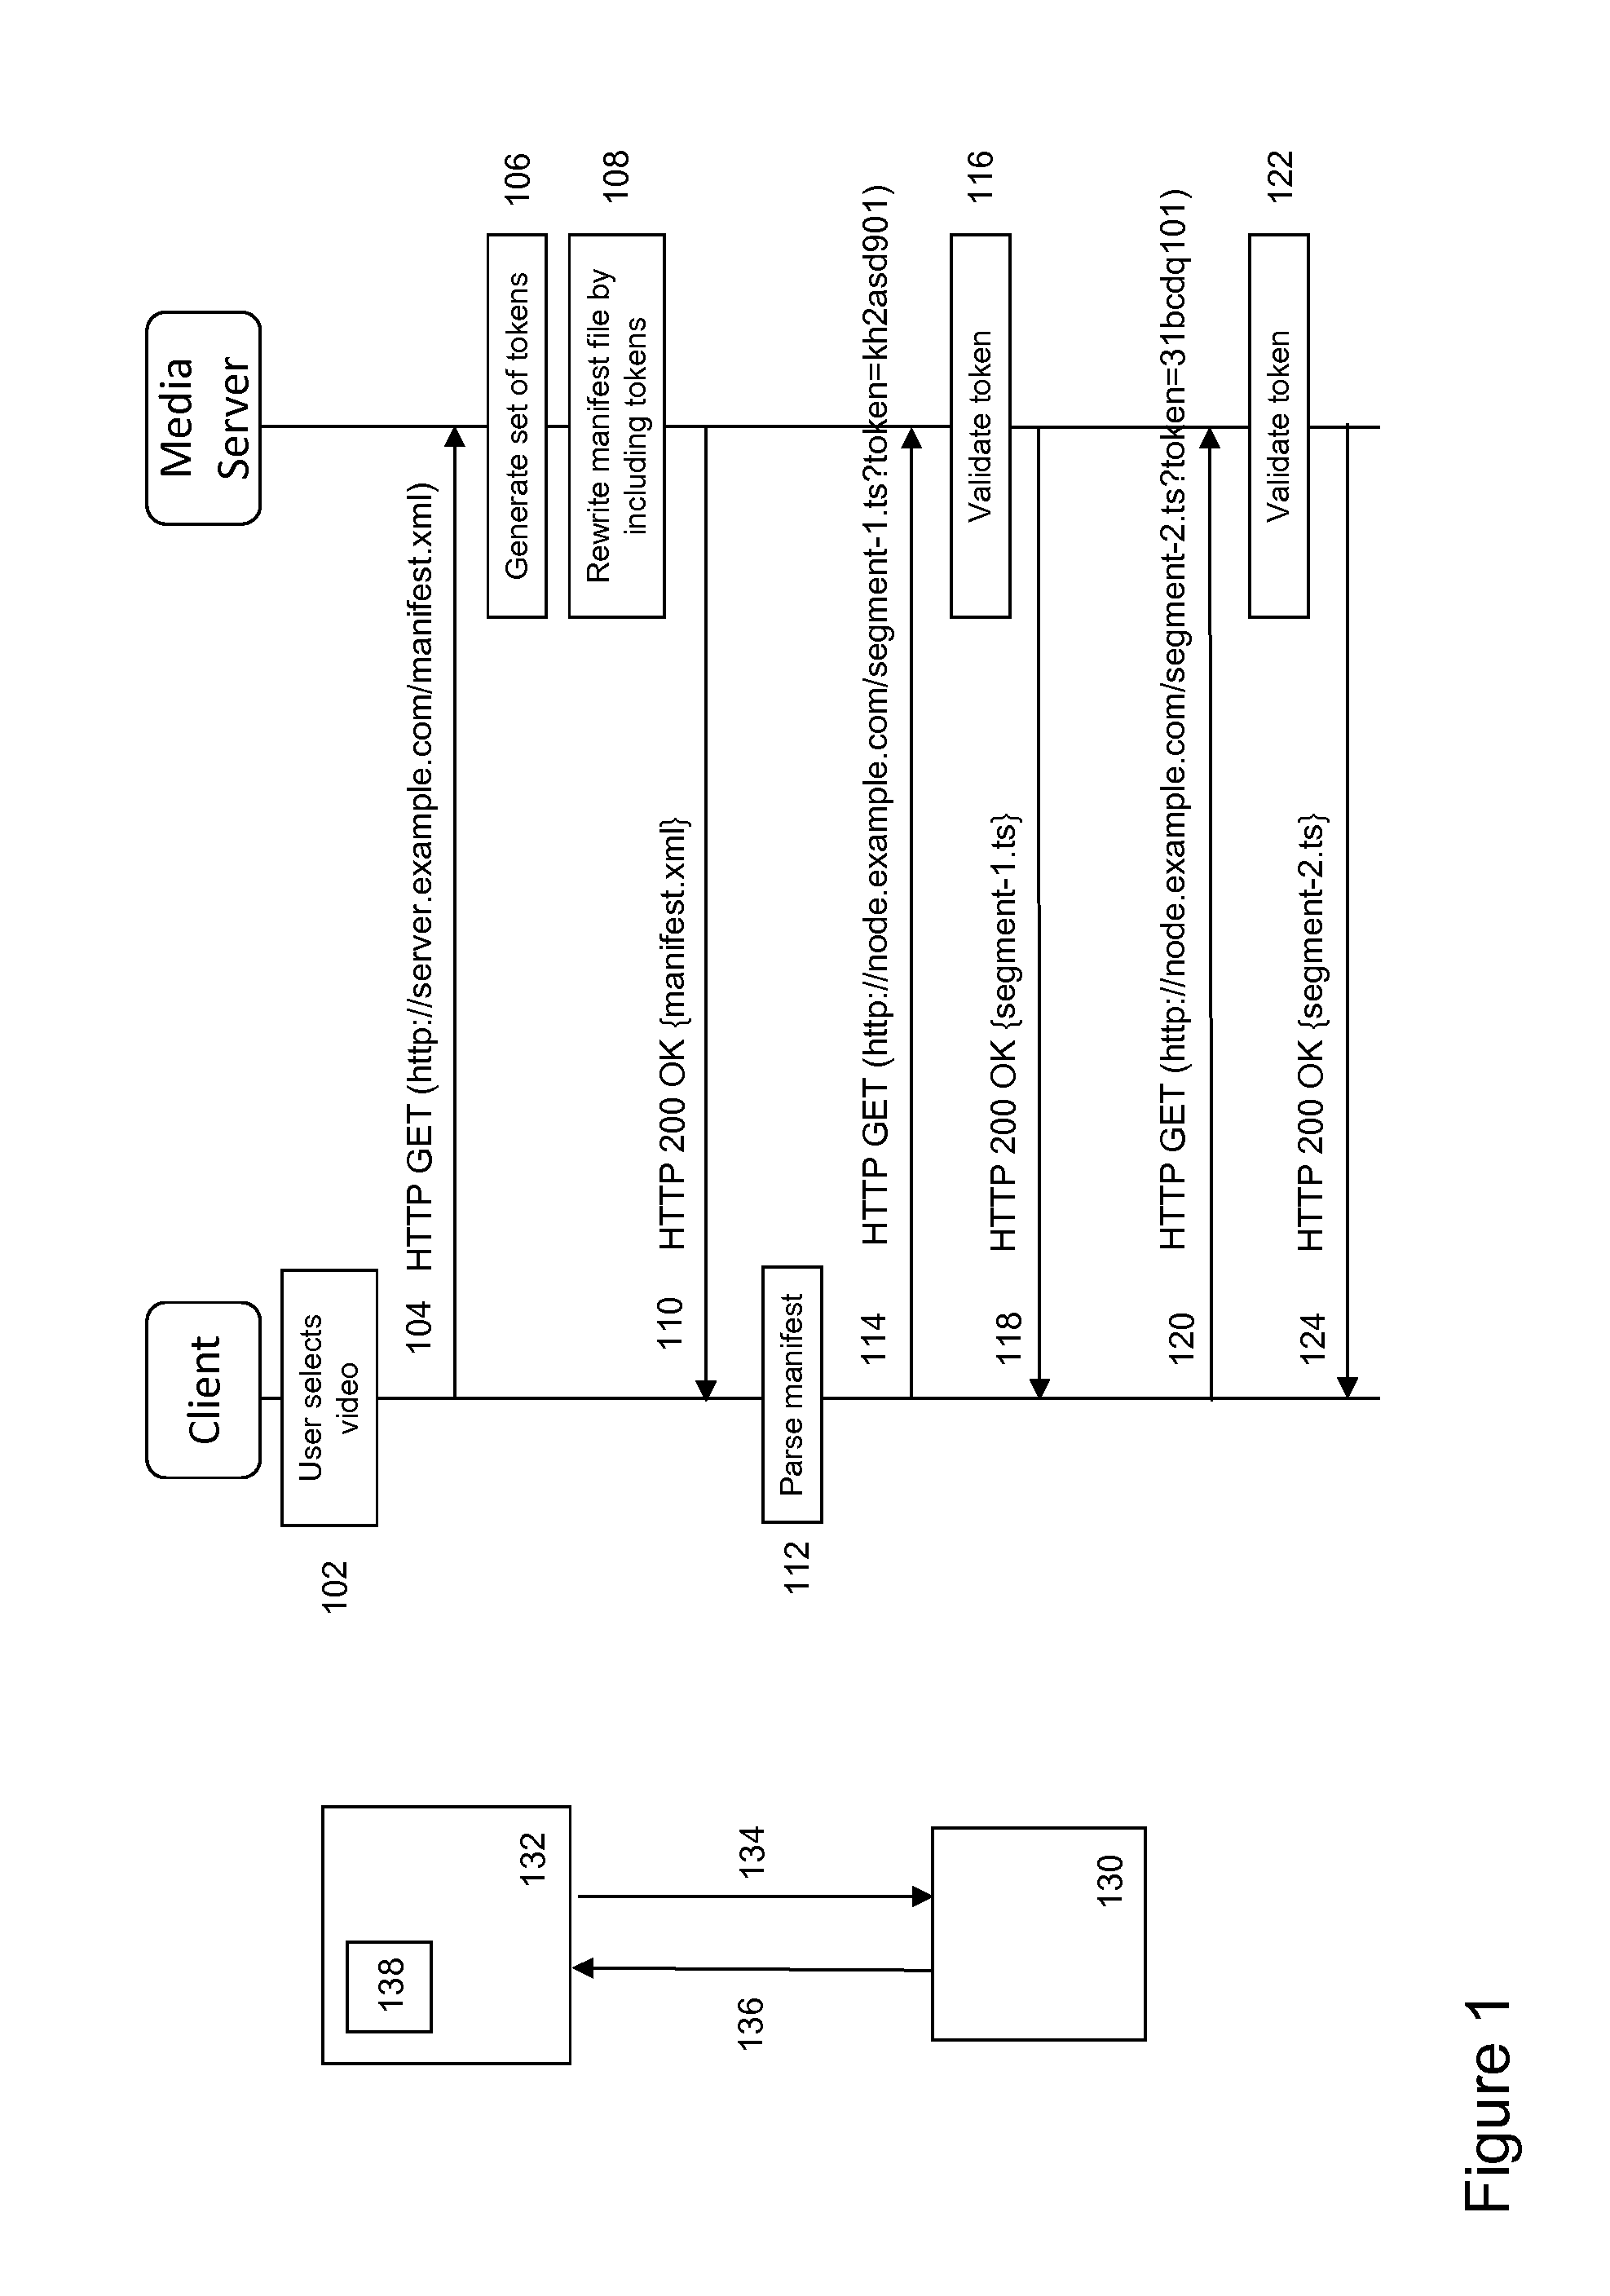 Token-Based Validation Method for Segmented Content Delivery